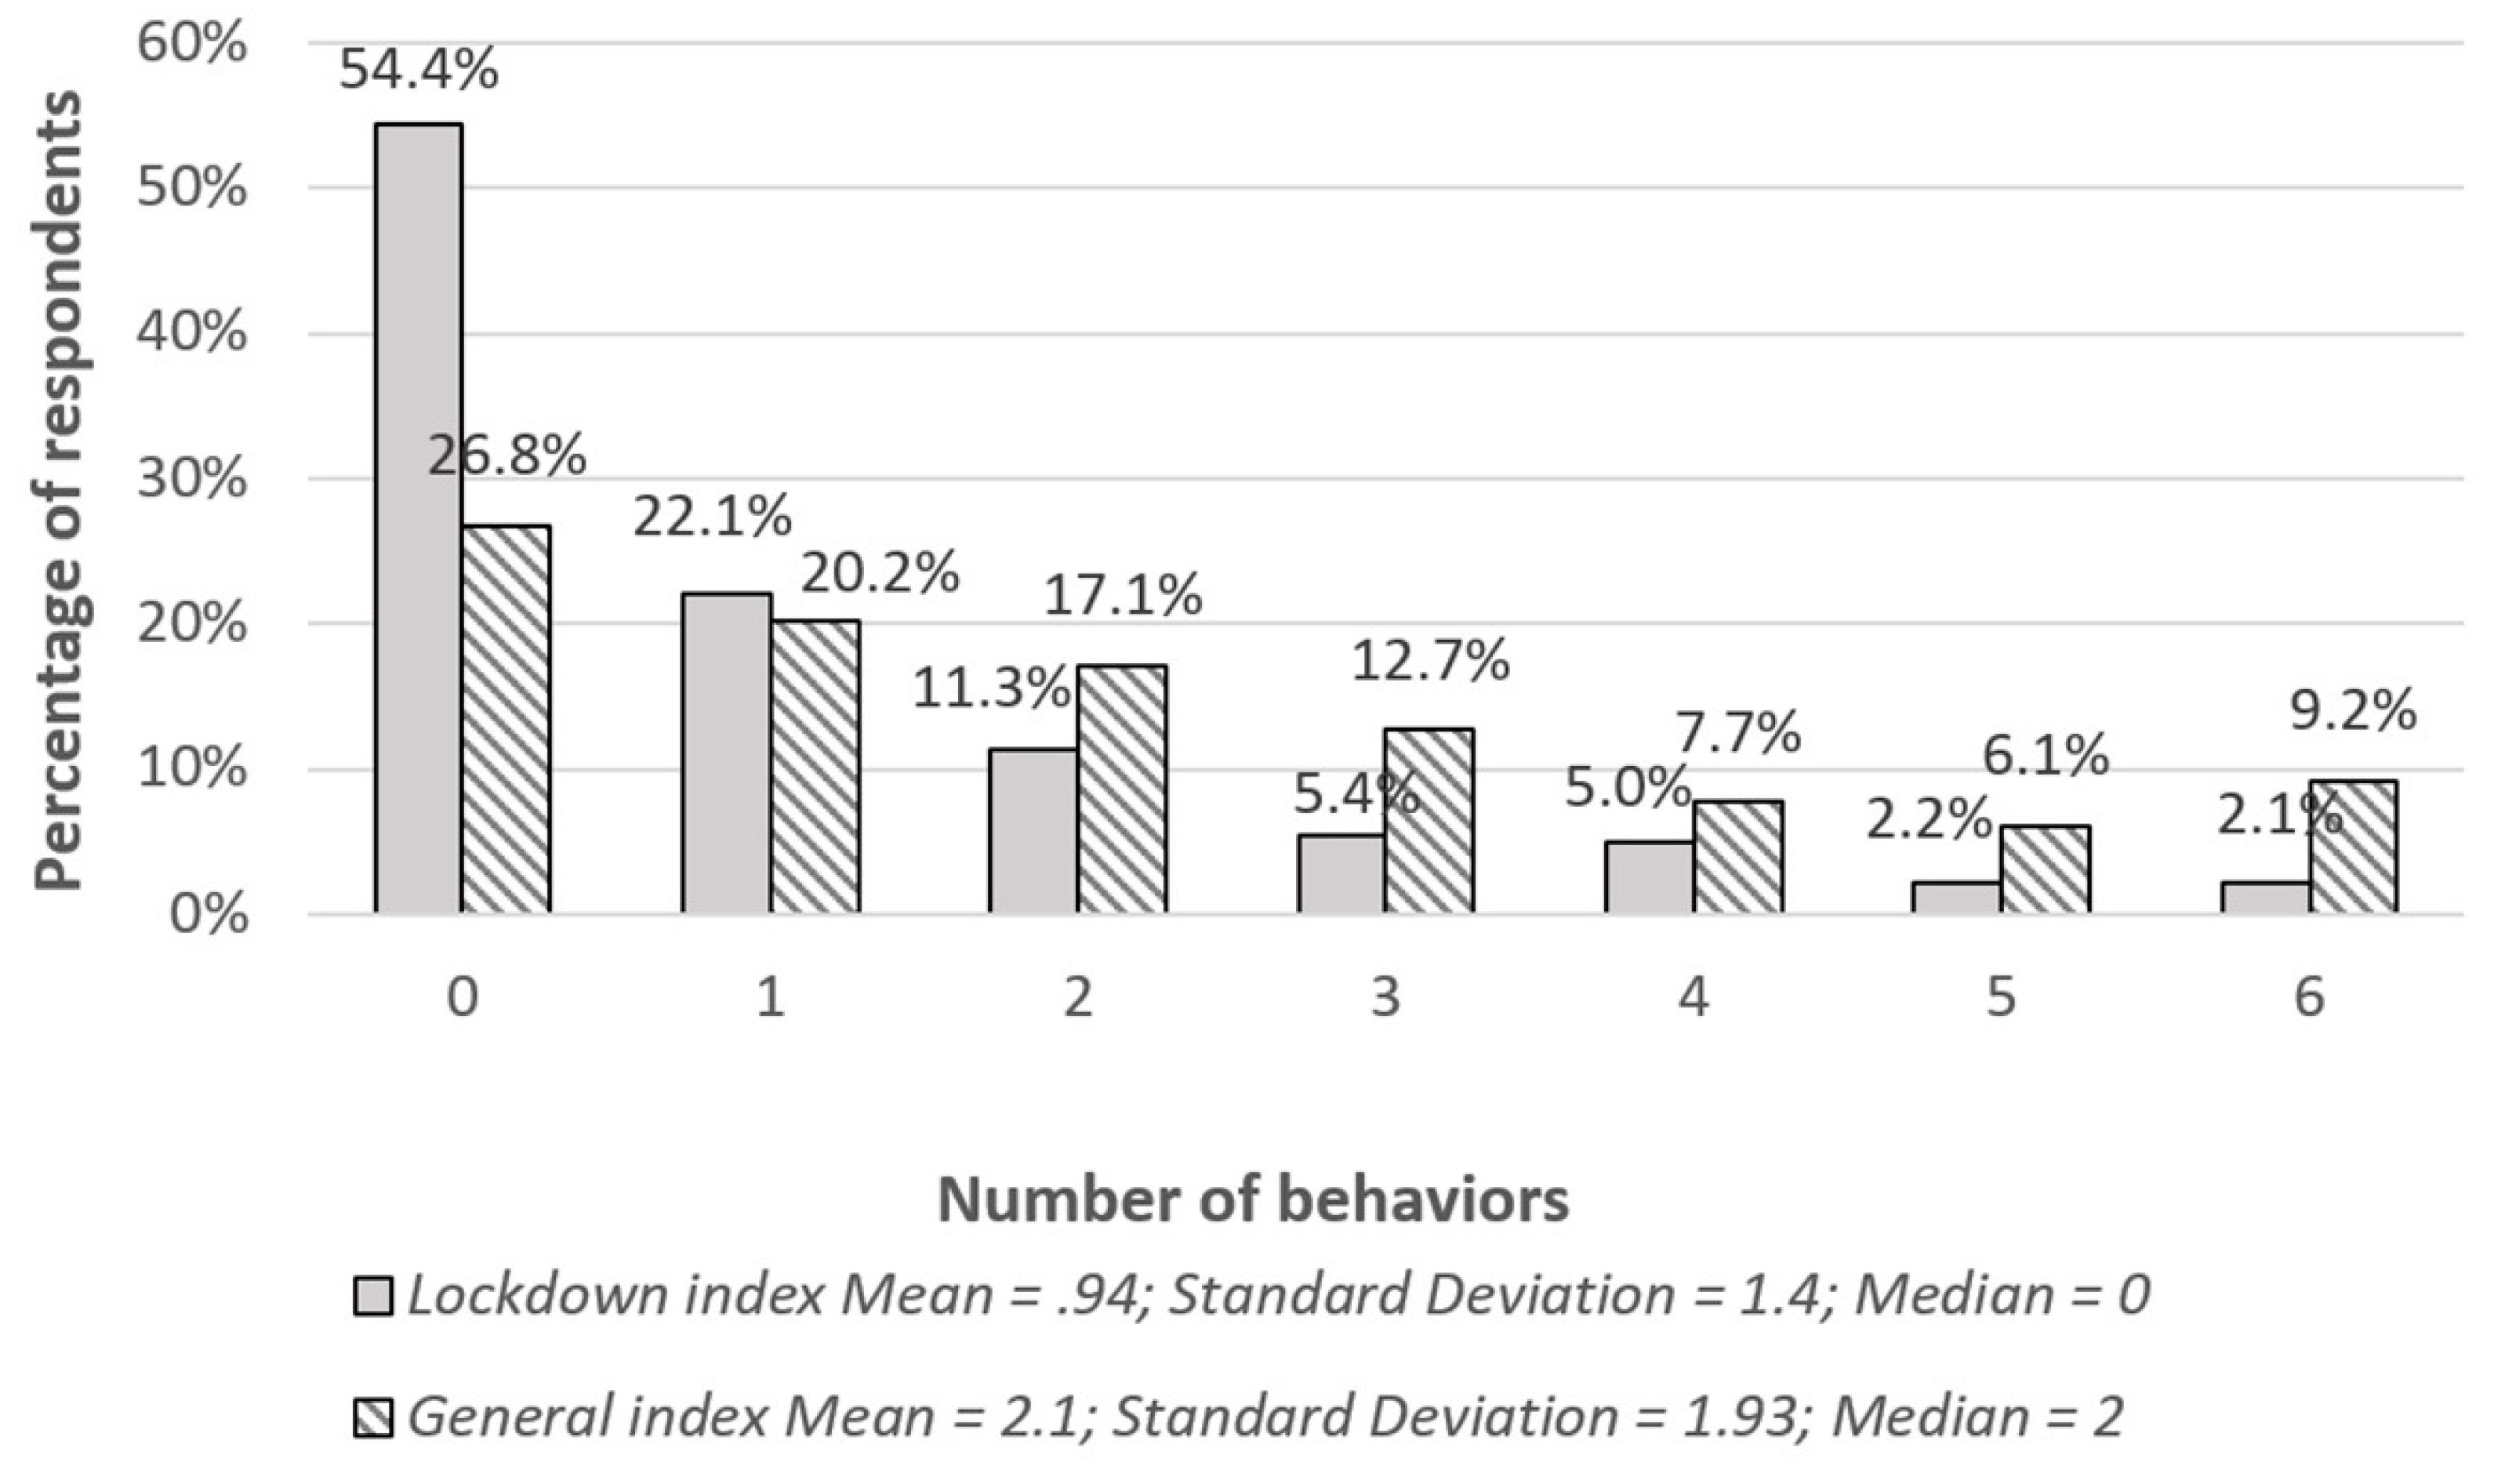 IJERPH | Free Full-Text | Self-Medication-Related Behaviors and Poland's  COVID-19 Lockdown